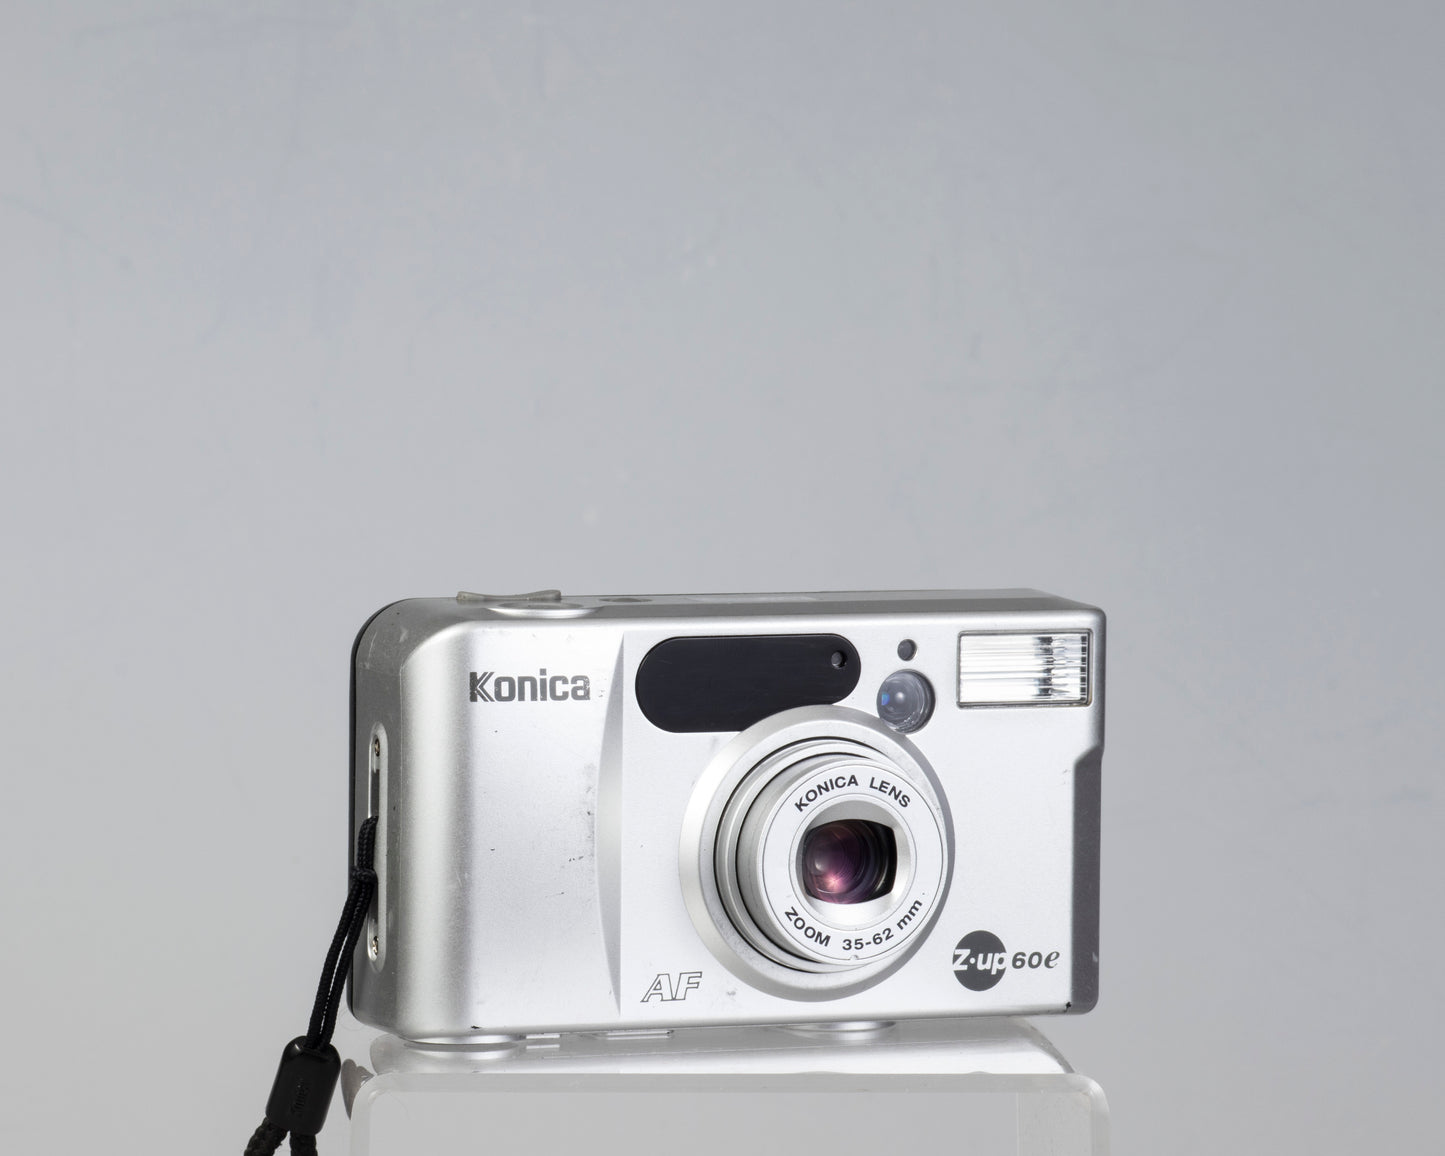 The Konica Z-up 60e is a compact point-and-shoot from the early 2000s